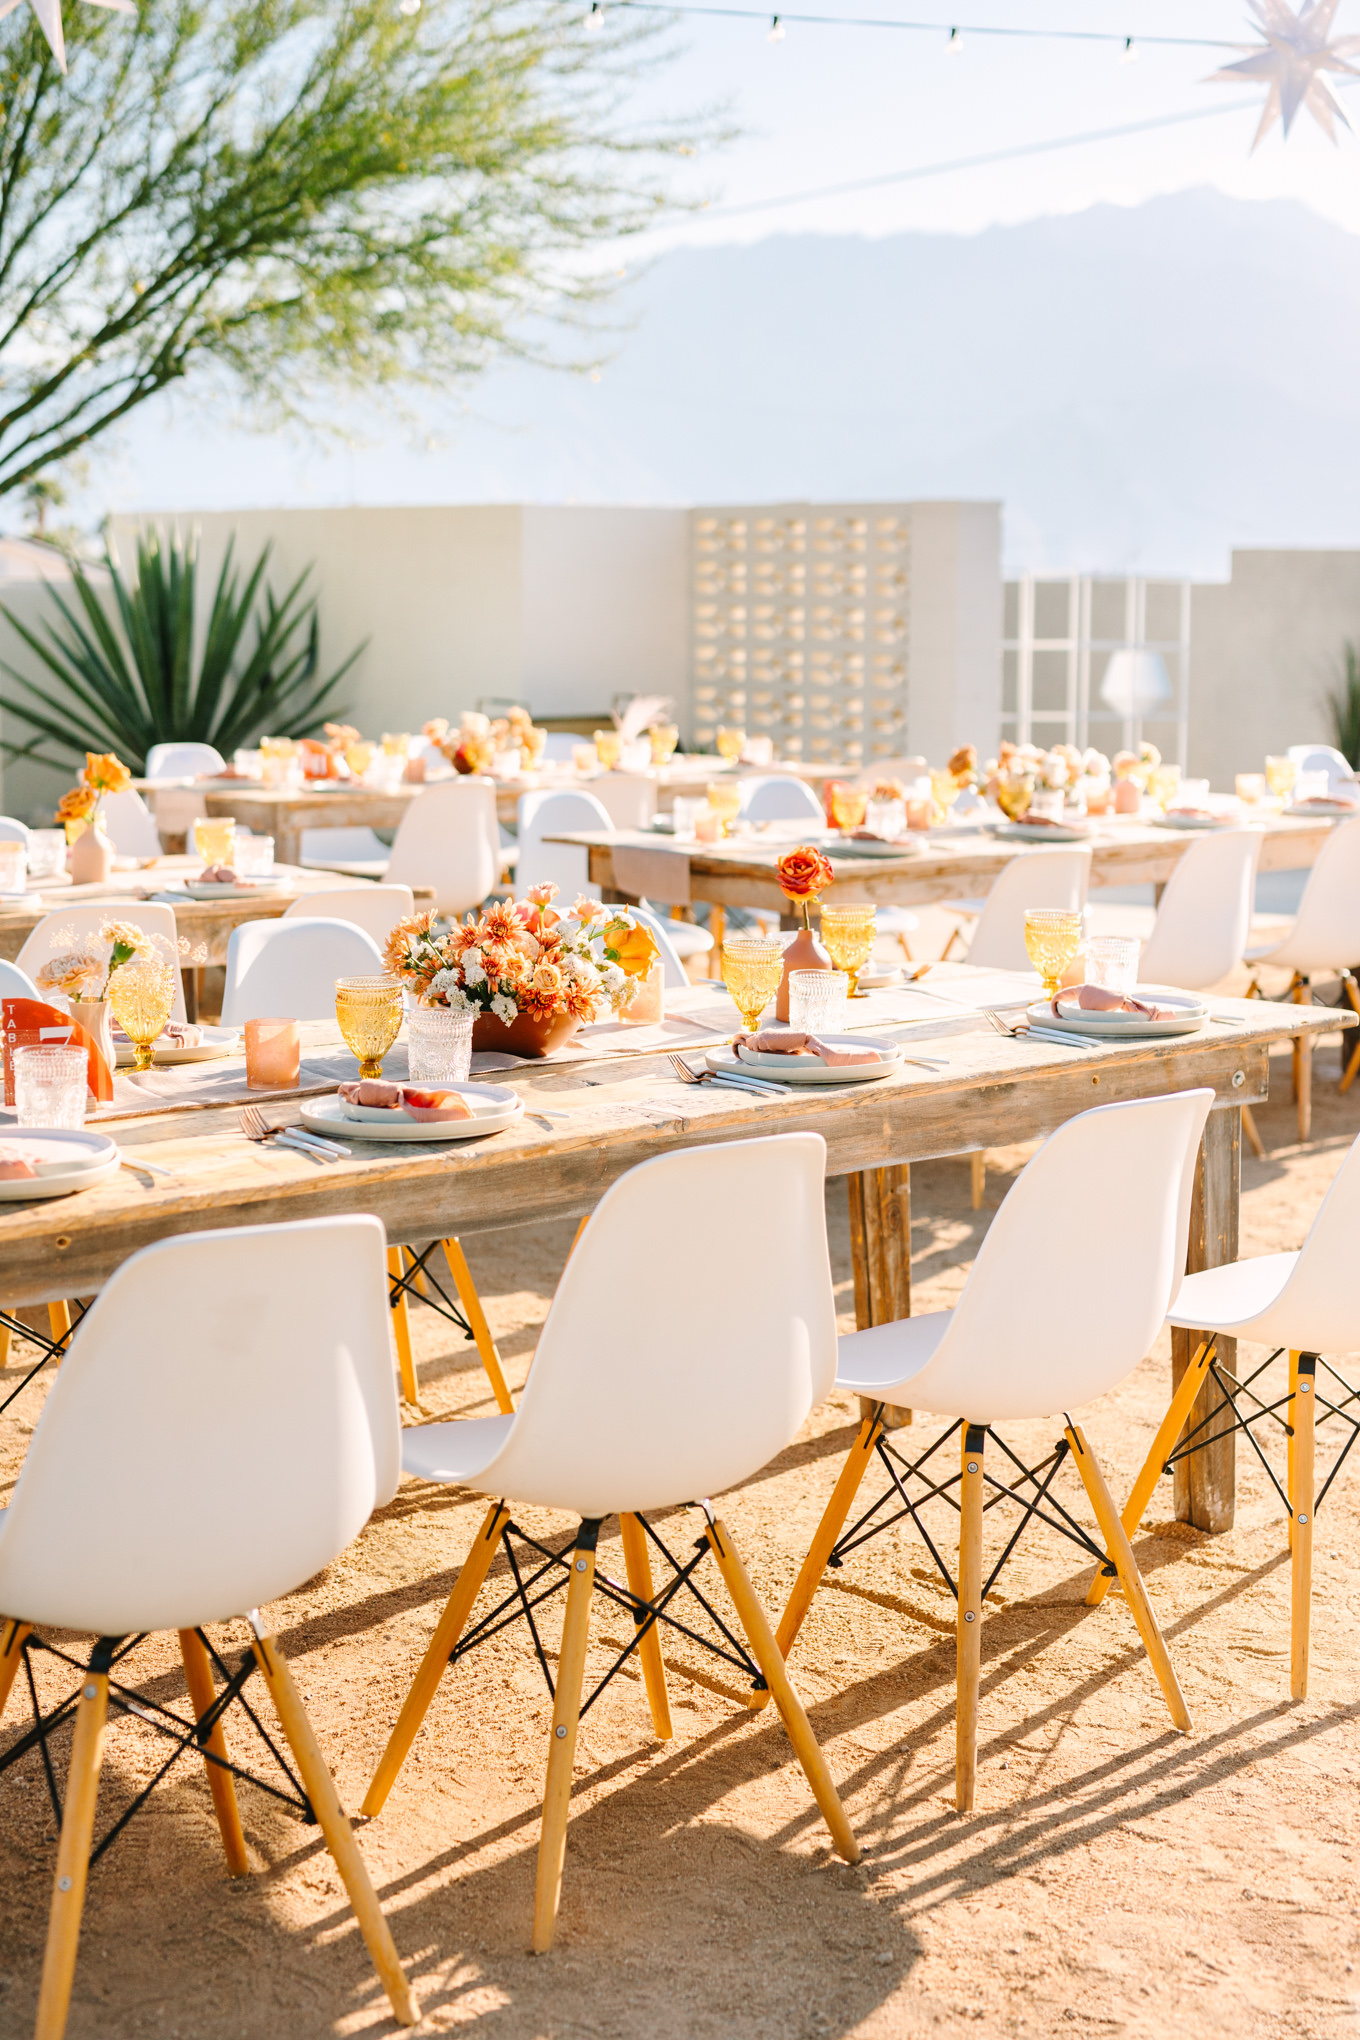 White bucket chairs at wedding reception | Pink and orange Lautner Compound wedding | Colorful Palm Springs wedding photography | #palmspringsphotographer #palmspringswedding #lautnercompound #southerncaliforniawedding  Source: Mary Costa Photography | Los Angeles